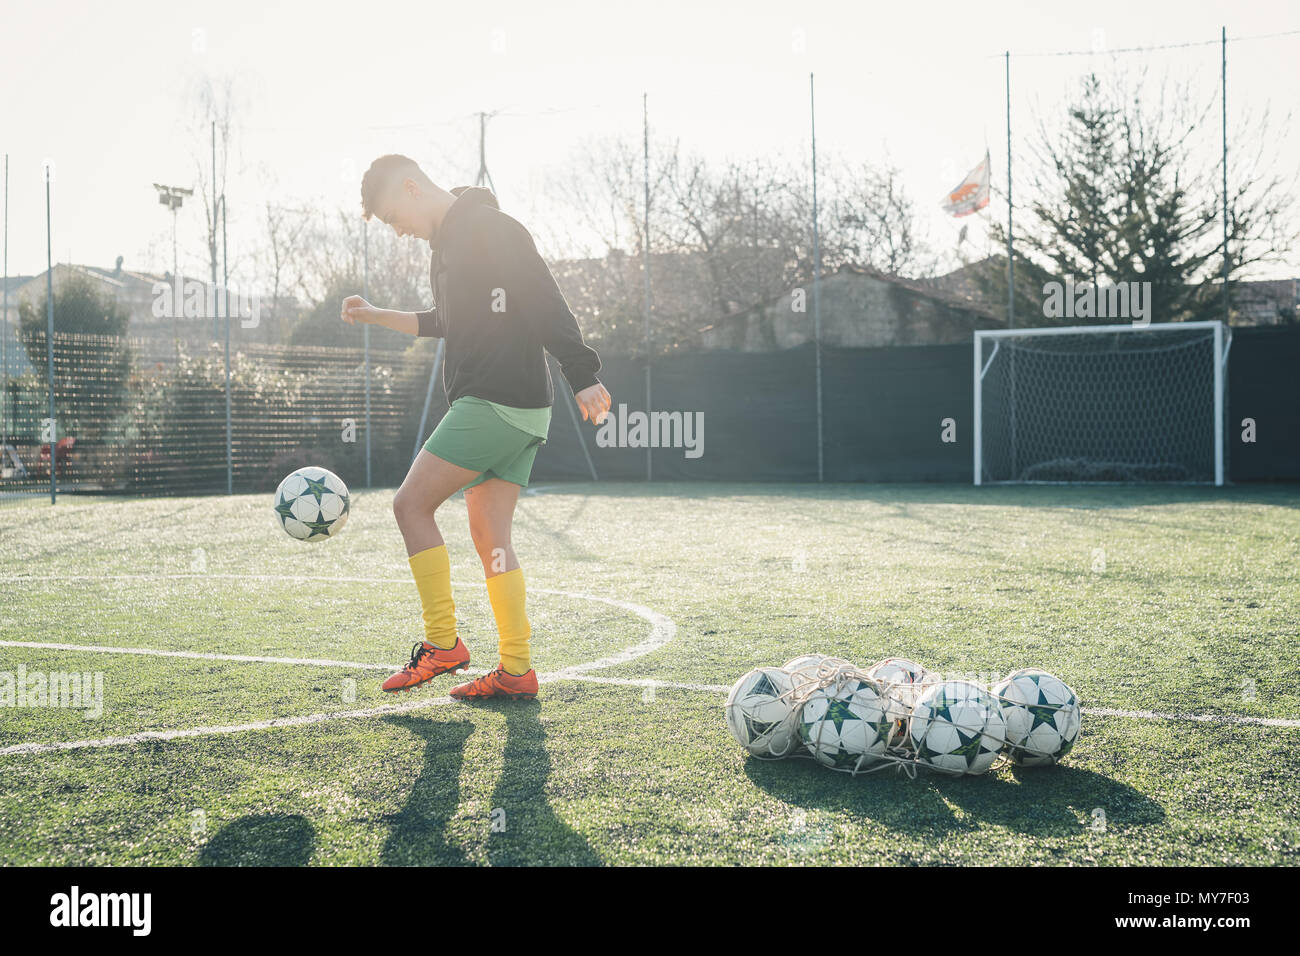 Football player practising on football pitch Stock Photo